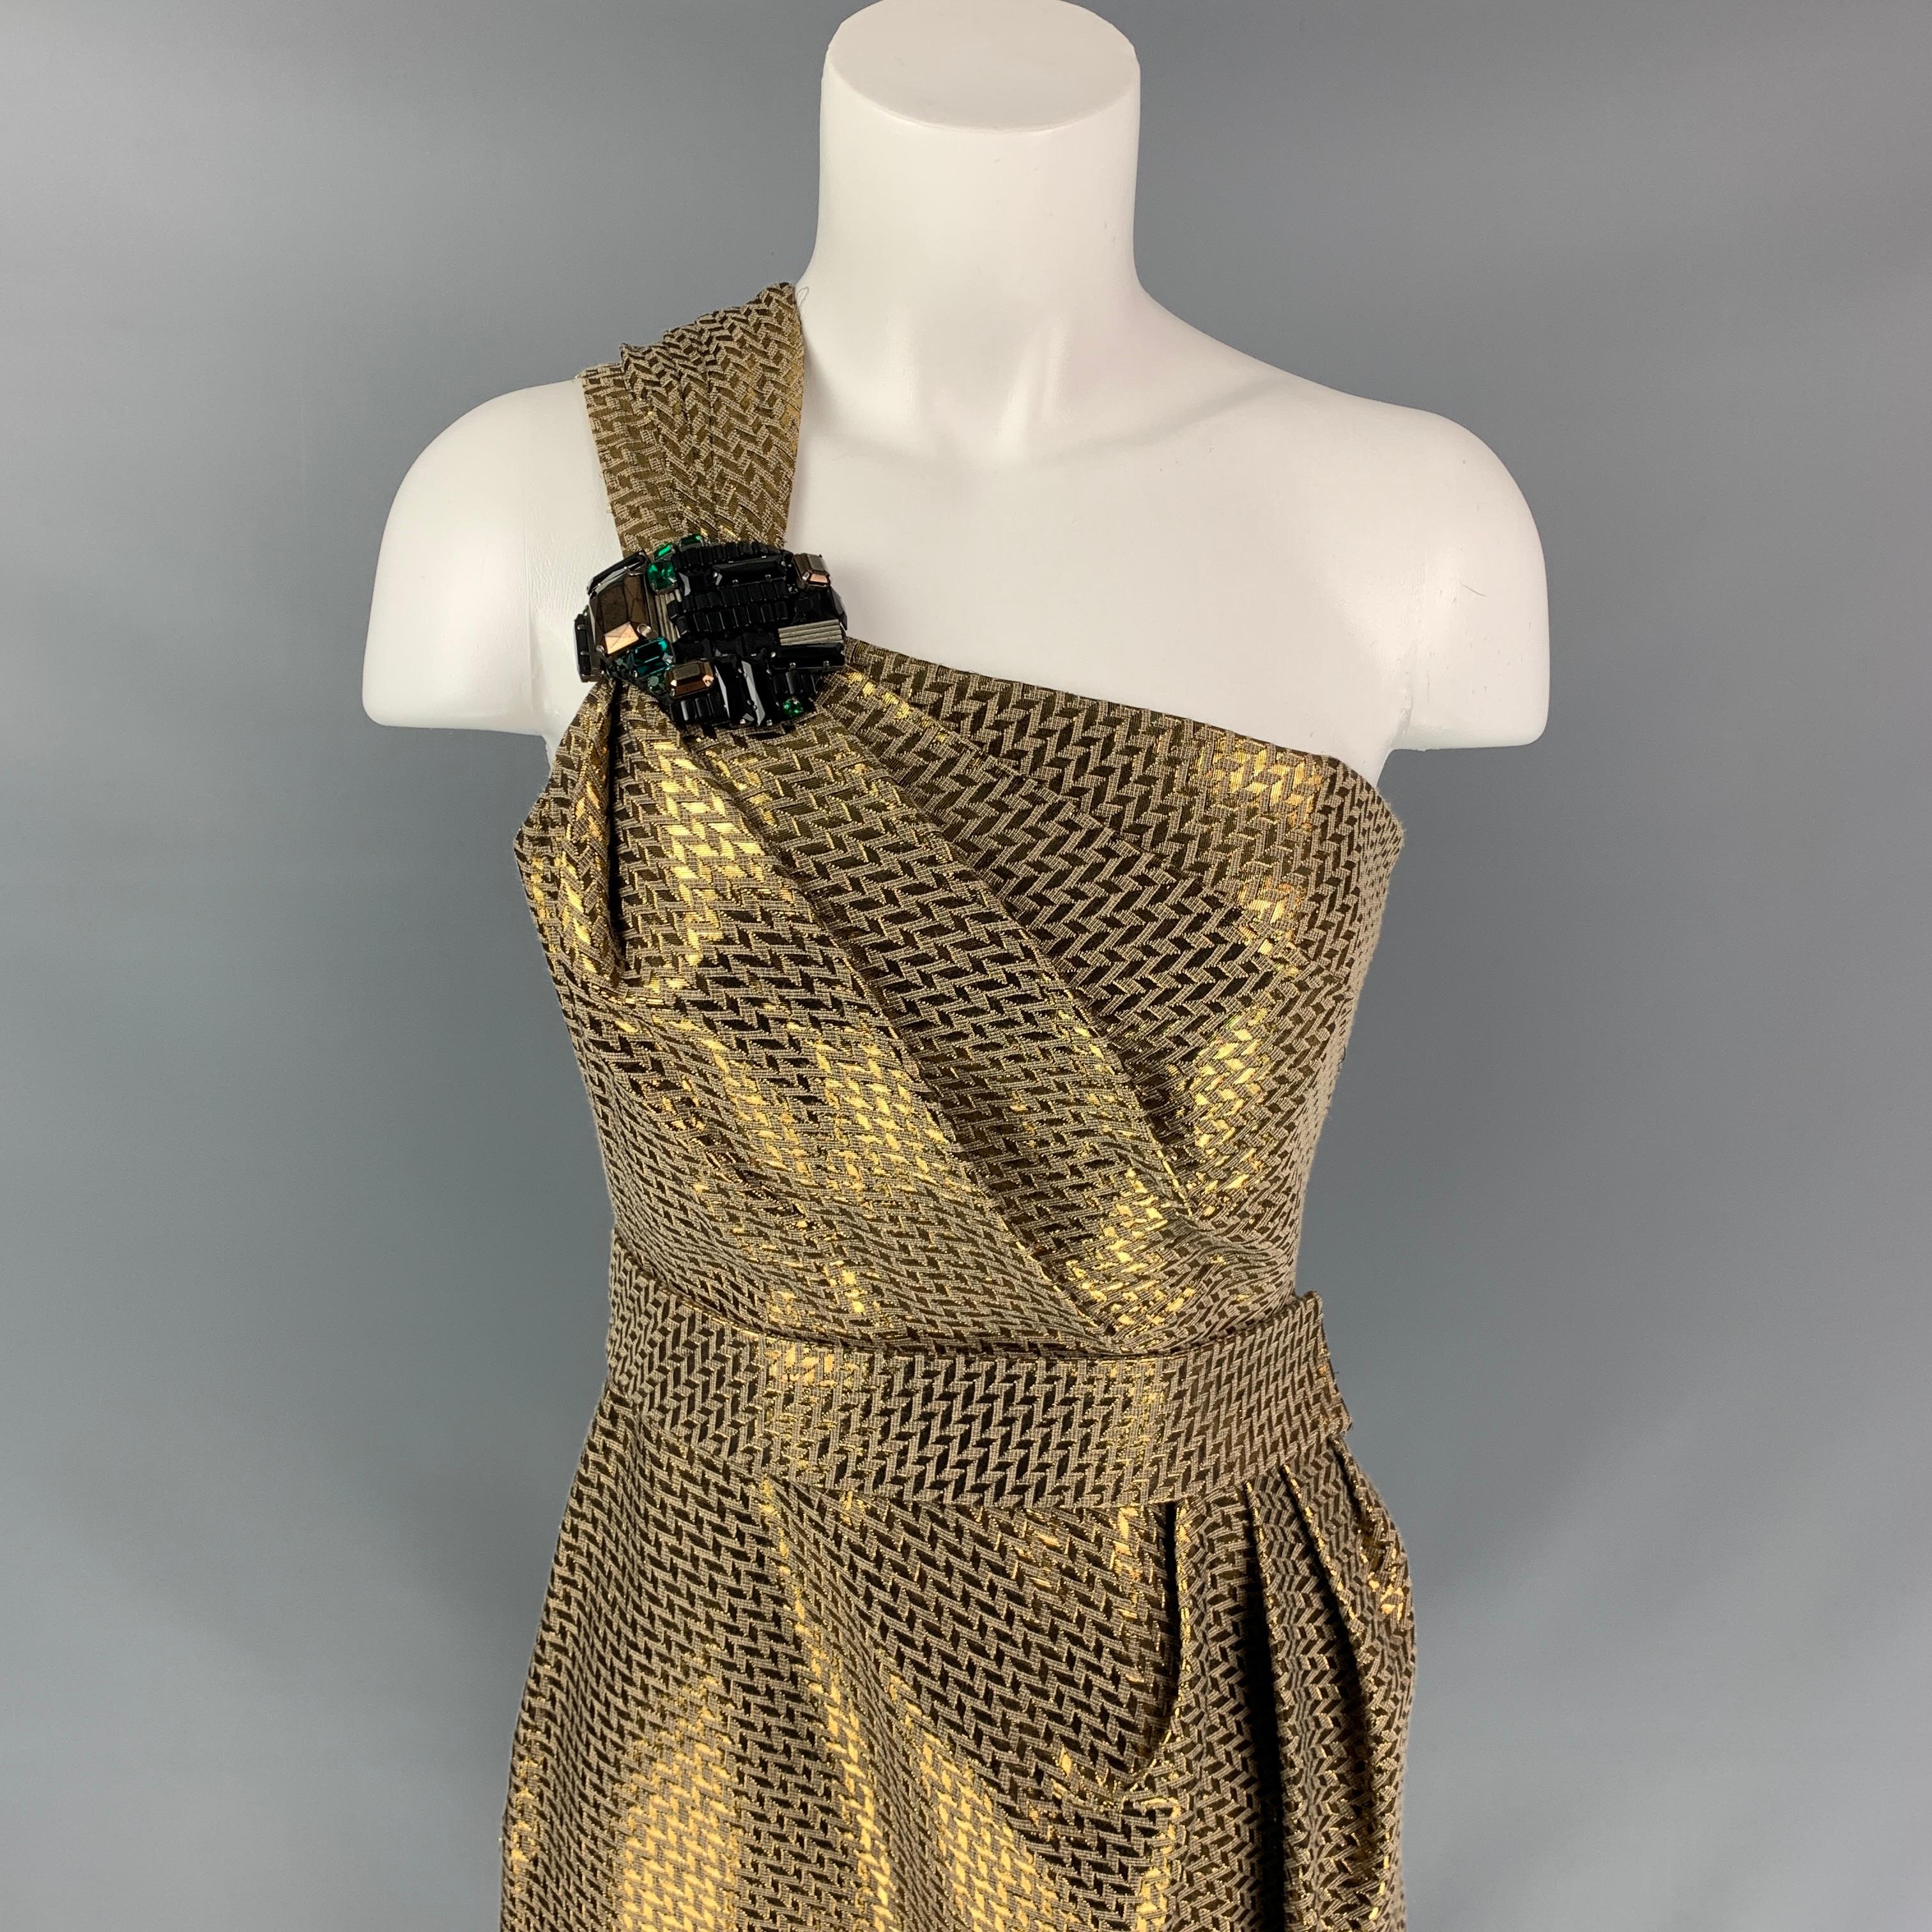 MATTHEW WILLAMSON dress comes in a gold metallic cotton blend featuring a one shoulder style, crystal embellished detail, belt strap, layered, and a zipper closure. 

Very Good Pre-Owned Condition.
Marked: 8

Measurements:

Bust: 28 in.
Waist: 24